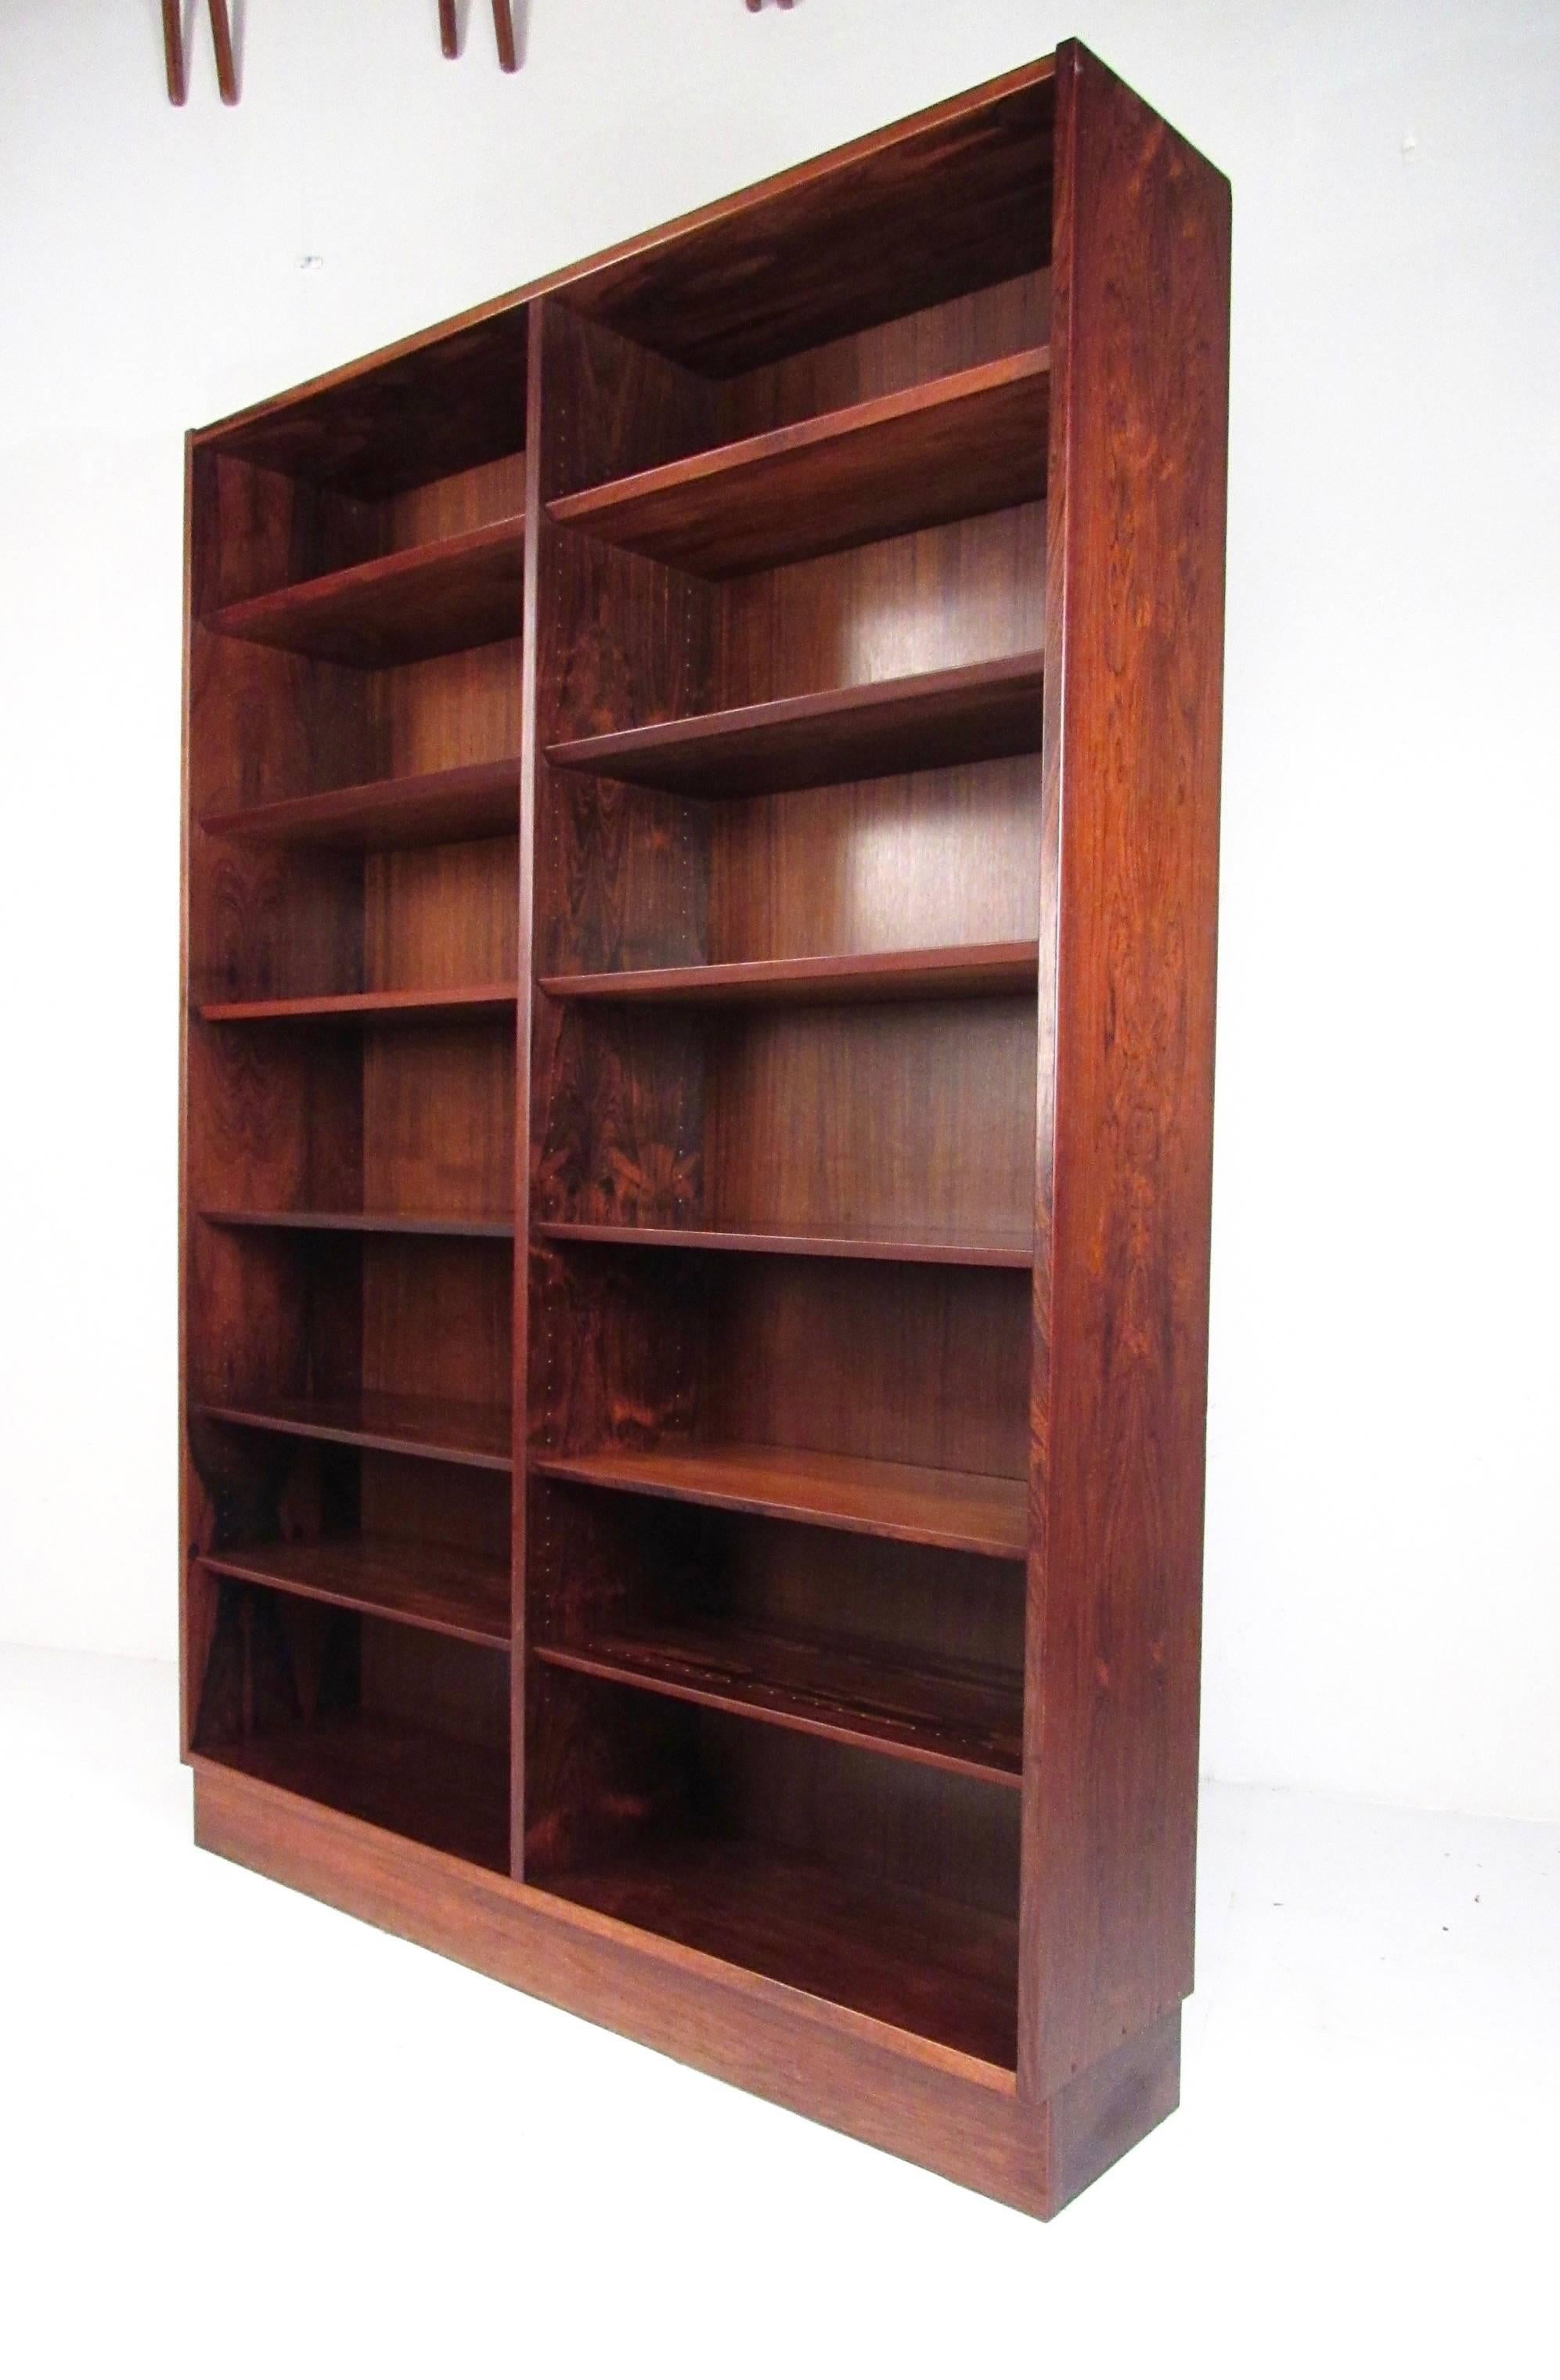 This tall rosewood bookcase features rich Scandinavian Modern wood choice, Mid-Century Modern style, and the Made in Denmark quality control mark. Spacious side-by-side shelf layout with adjustable shelves makes this an elegant and versatile book